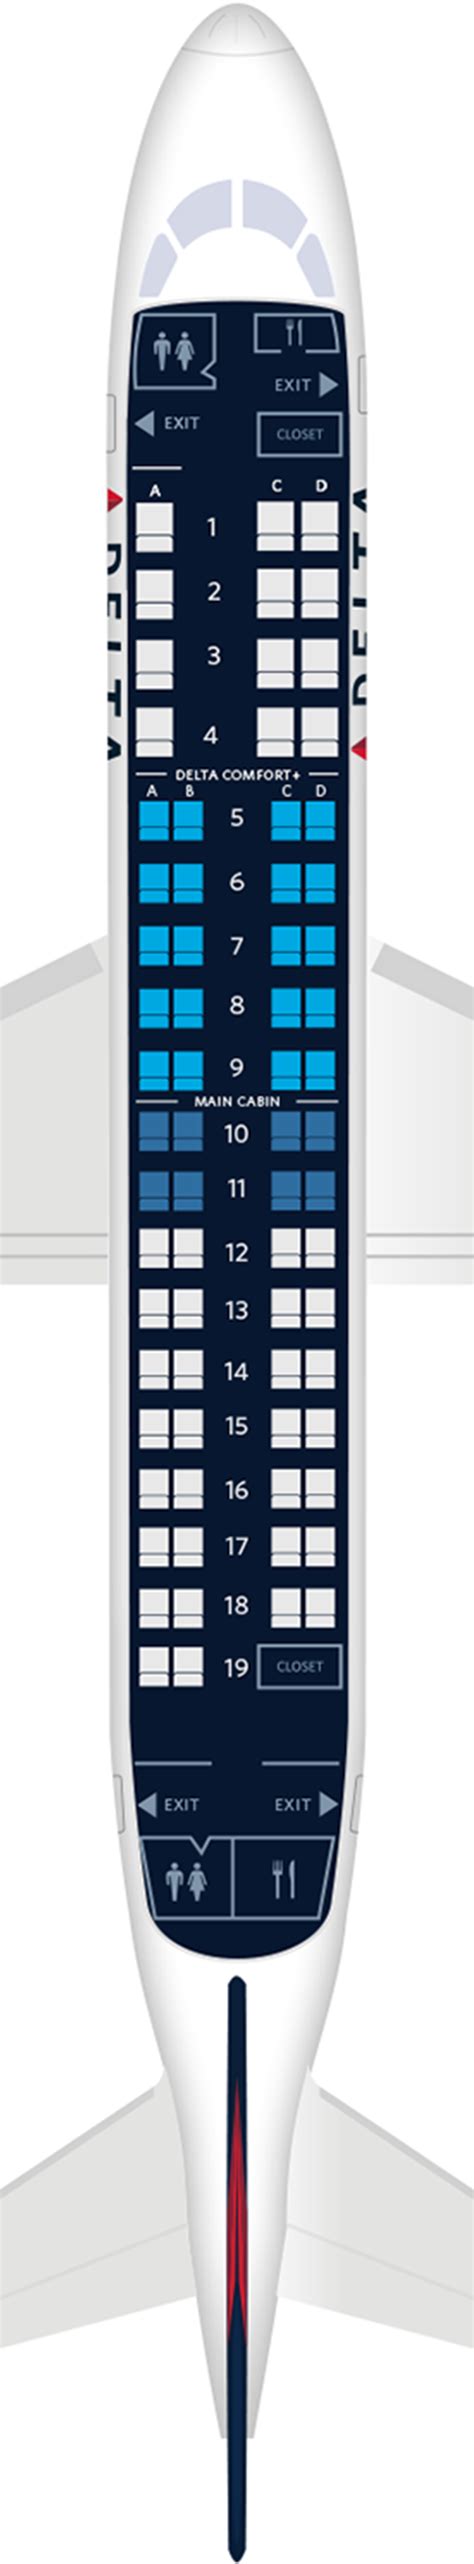 Air Burkina Embraer E175 aircraft seat map. Air Burkina operates a fleet of aircraft that includes the Embraer E175. The Embraer E175 is a medium-sized jet that typically seats around 76 passengers in a two-class configuration. The aircraft is known for its fuel efficiency and low operating costs, making it a popular choice for regional .... 